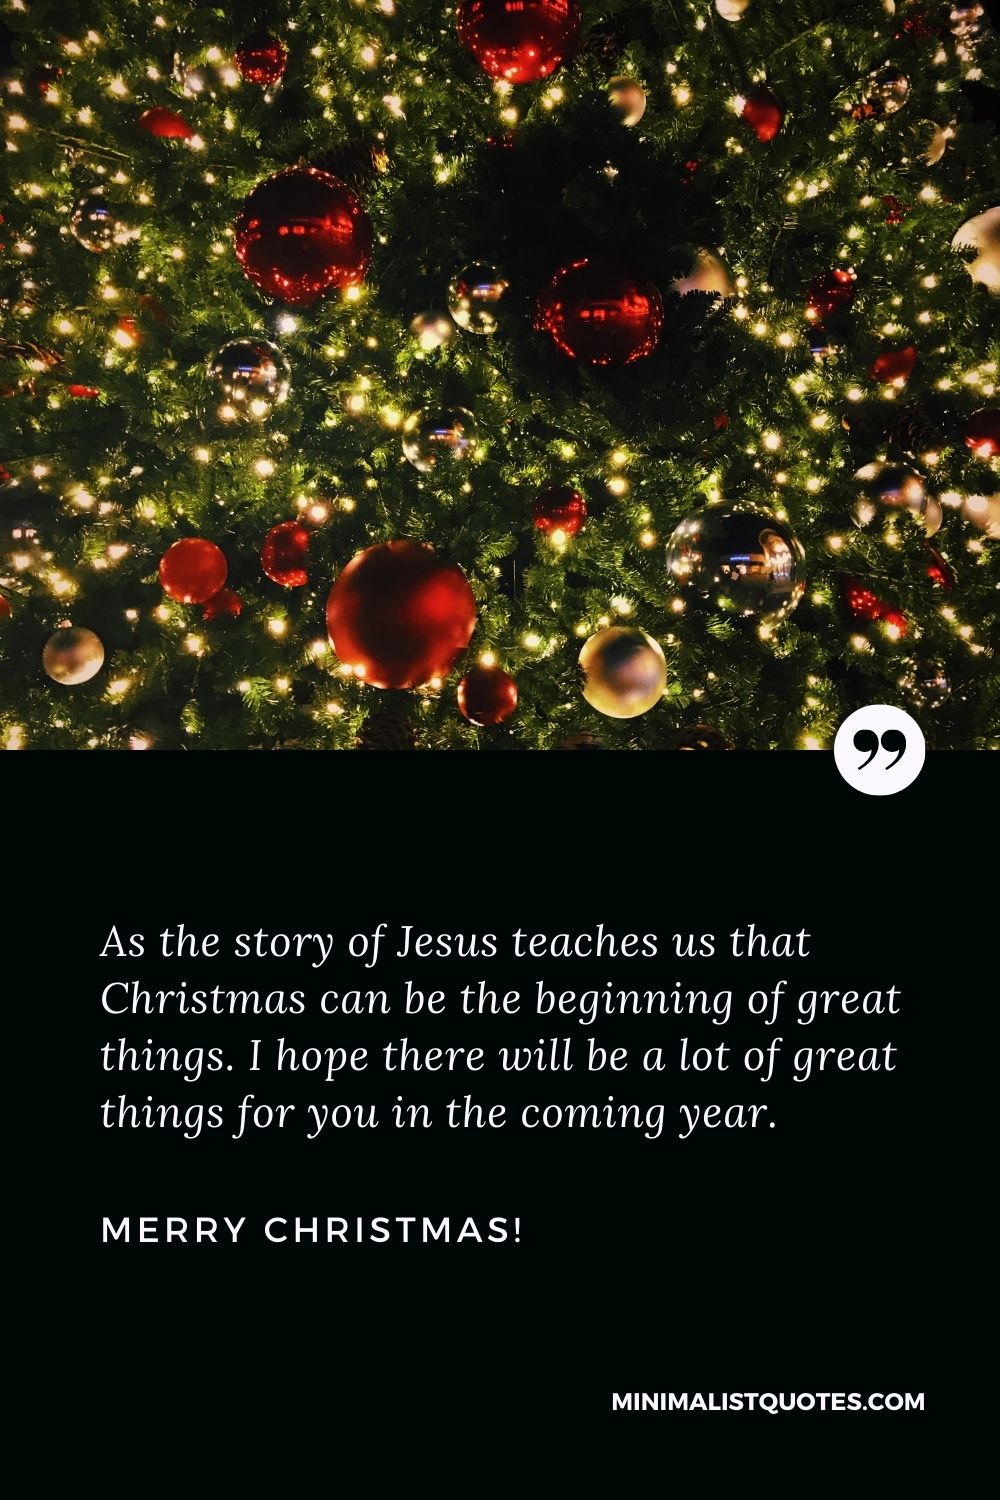 Best Christmas wishes: As the story of Jesus teaches us that Christmas can be the beginning of great things. I hope there will be a lot of great things for you in the coming year. Merry Christmas!